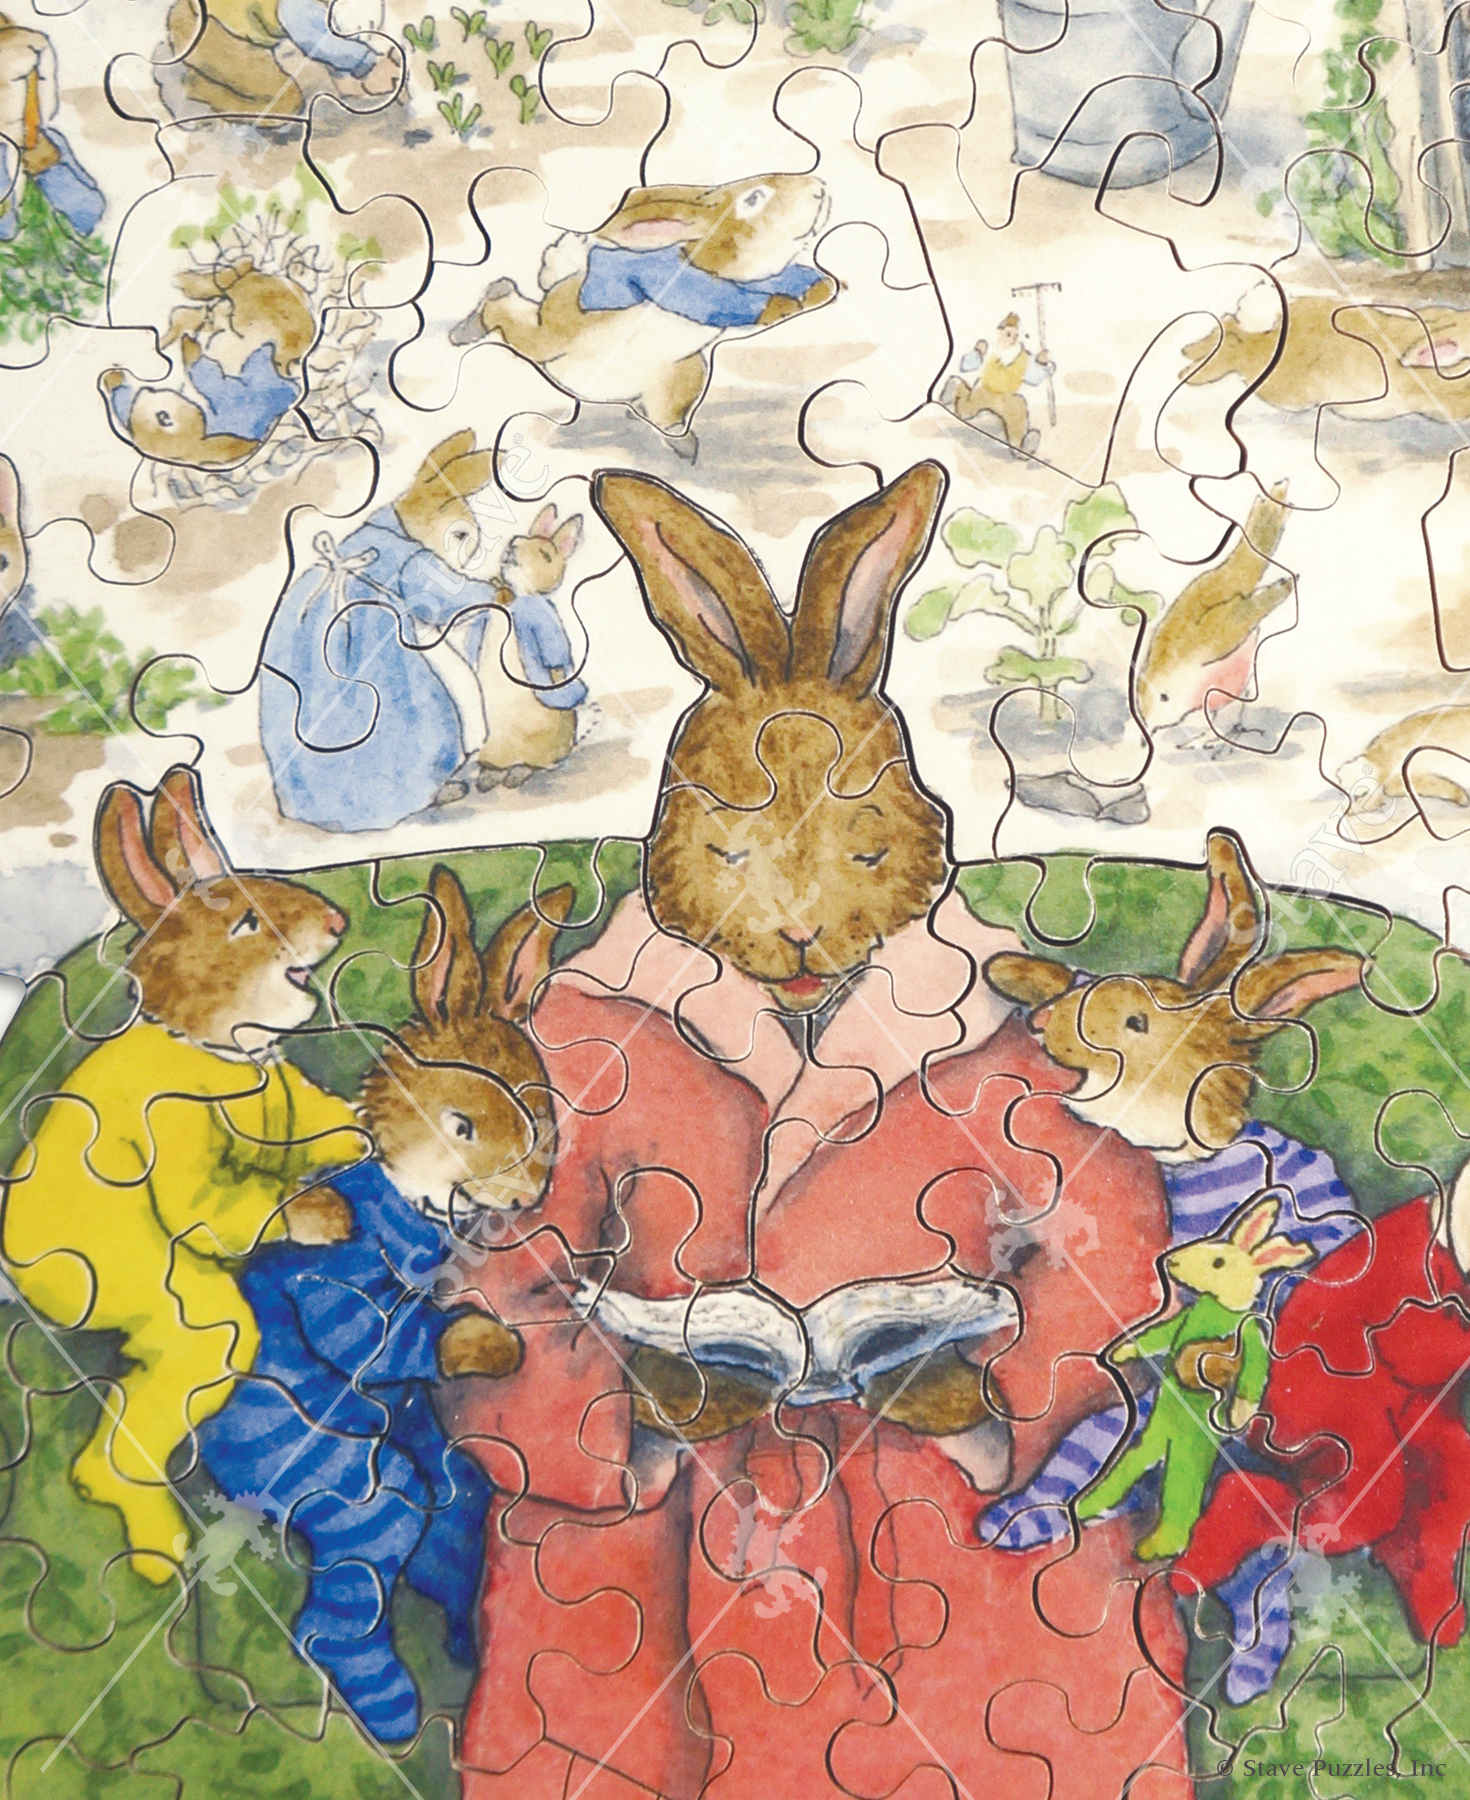 A cozy art course inspired by Beatrix Potter